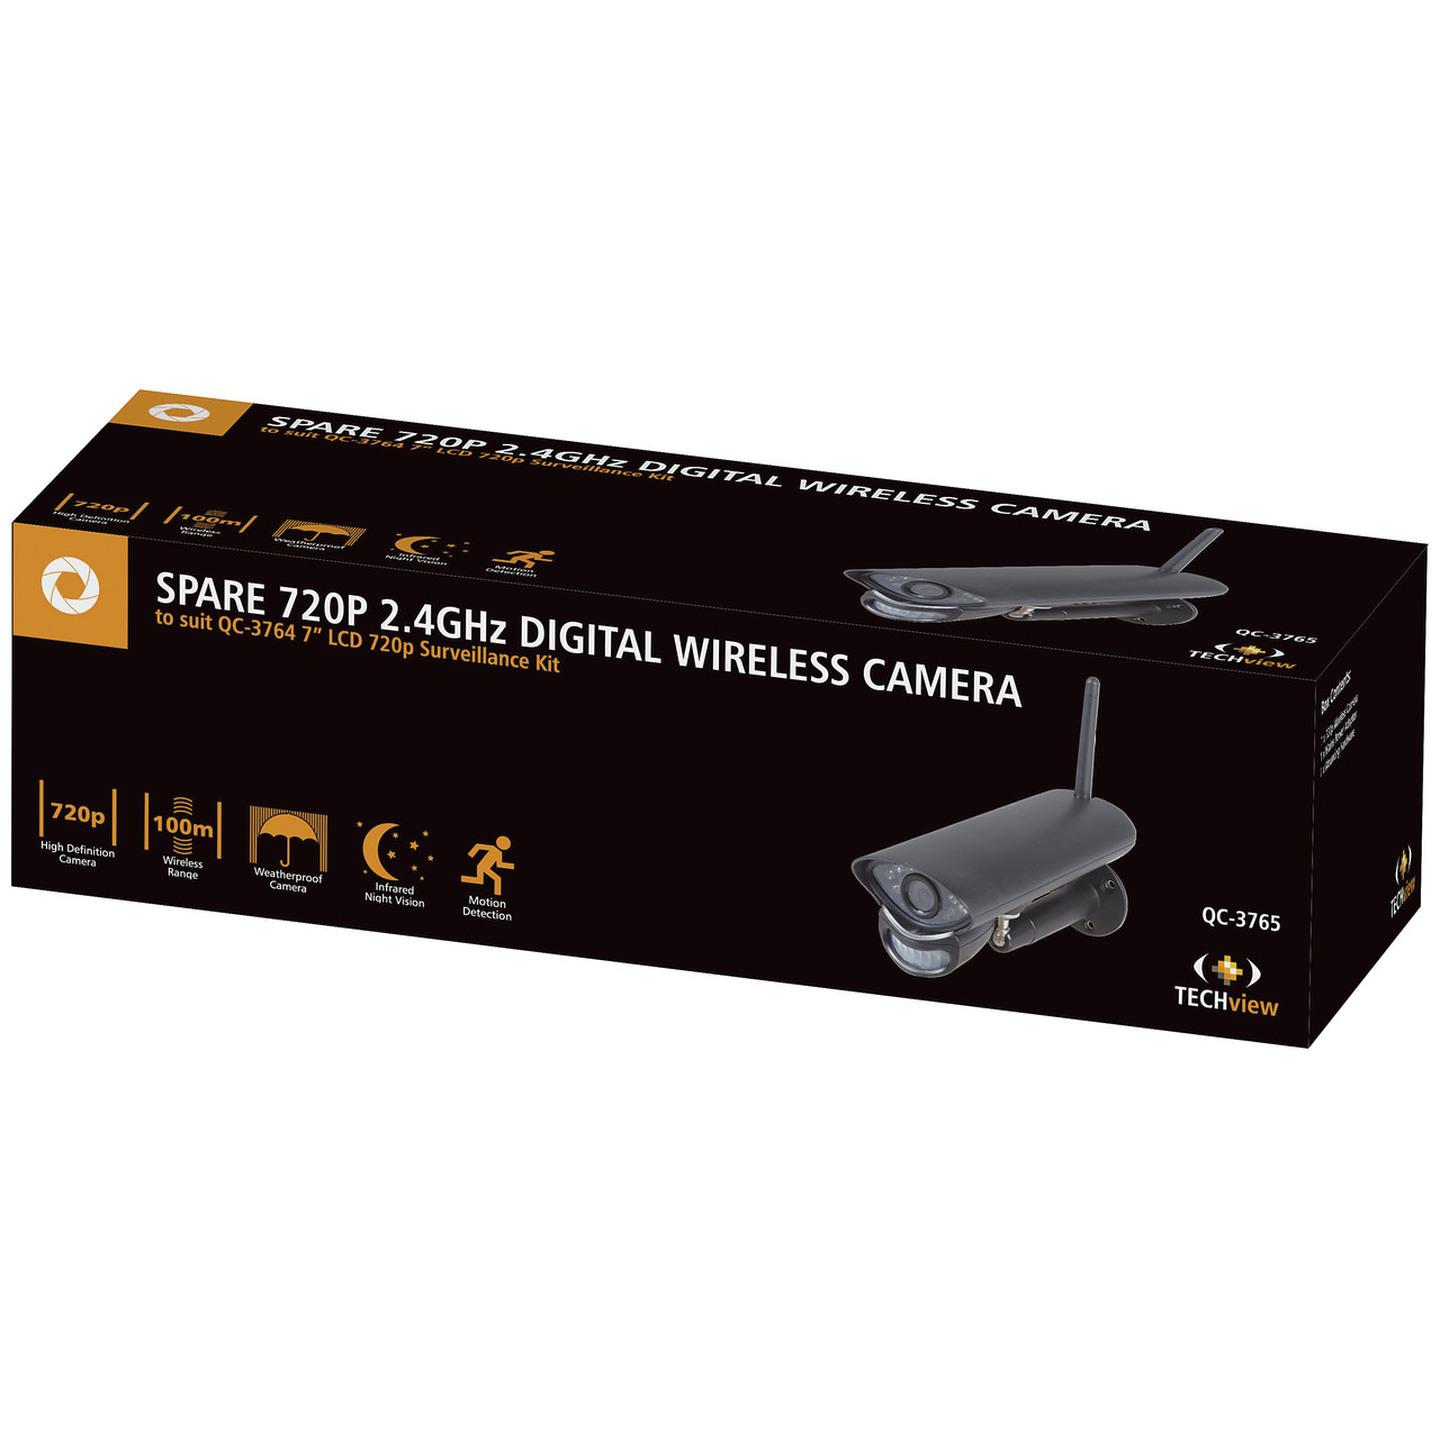 720p Wireless Camera to Suit QC-3764